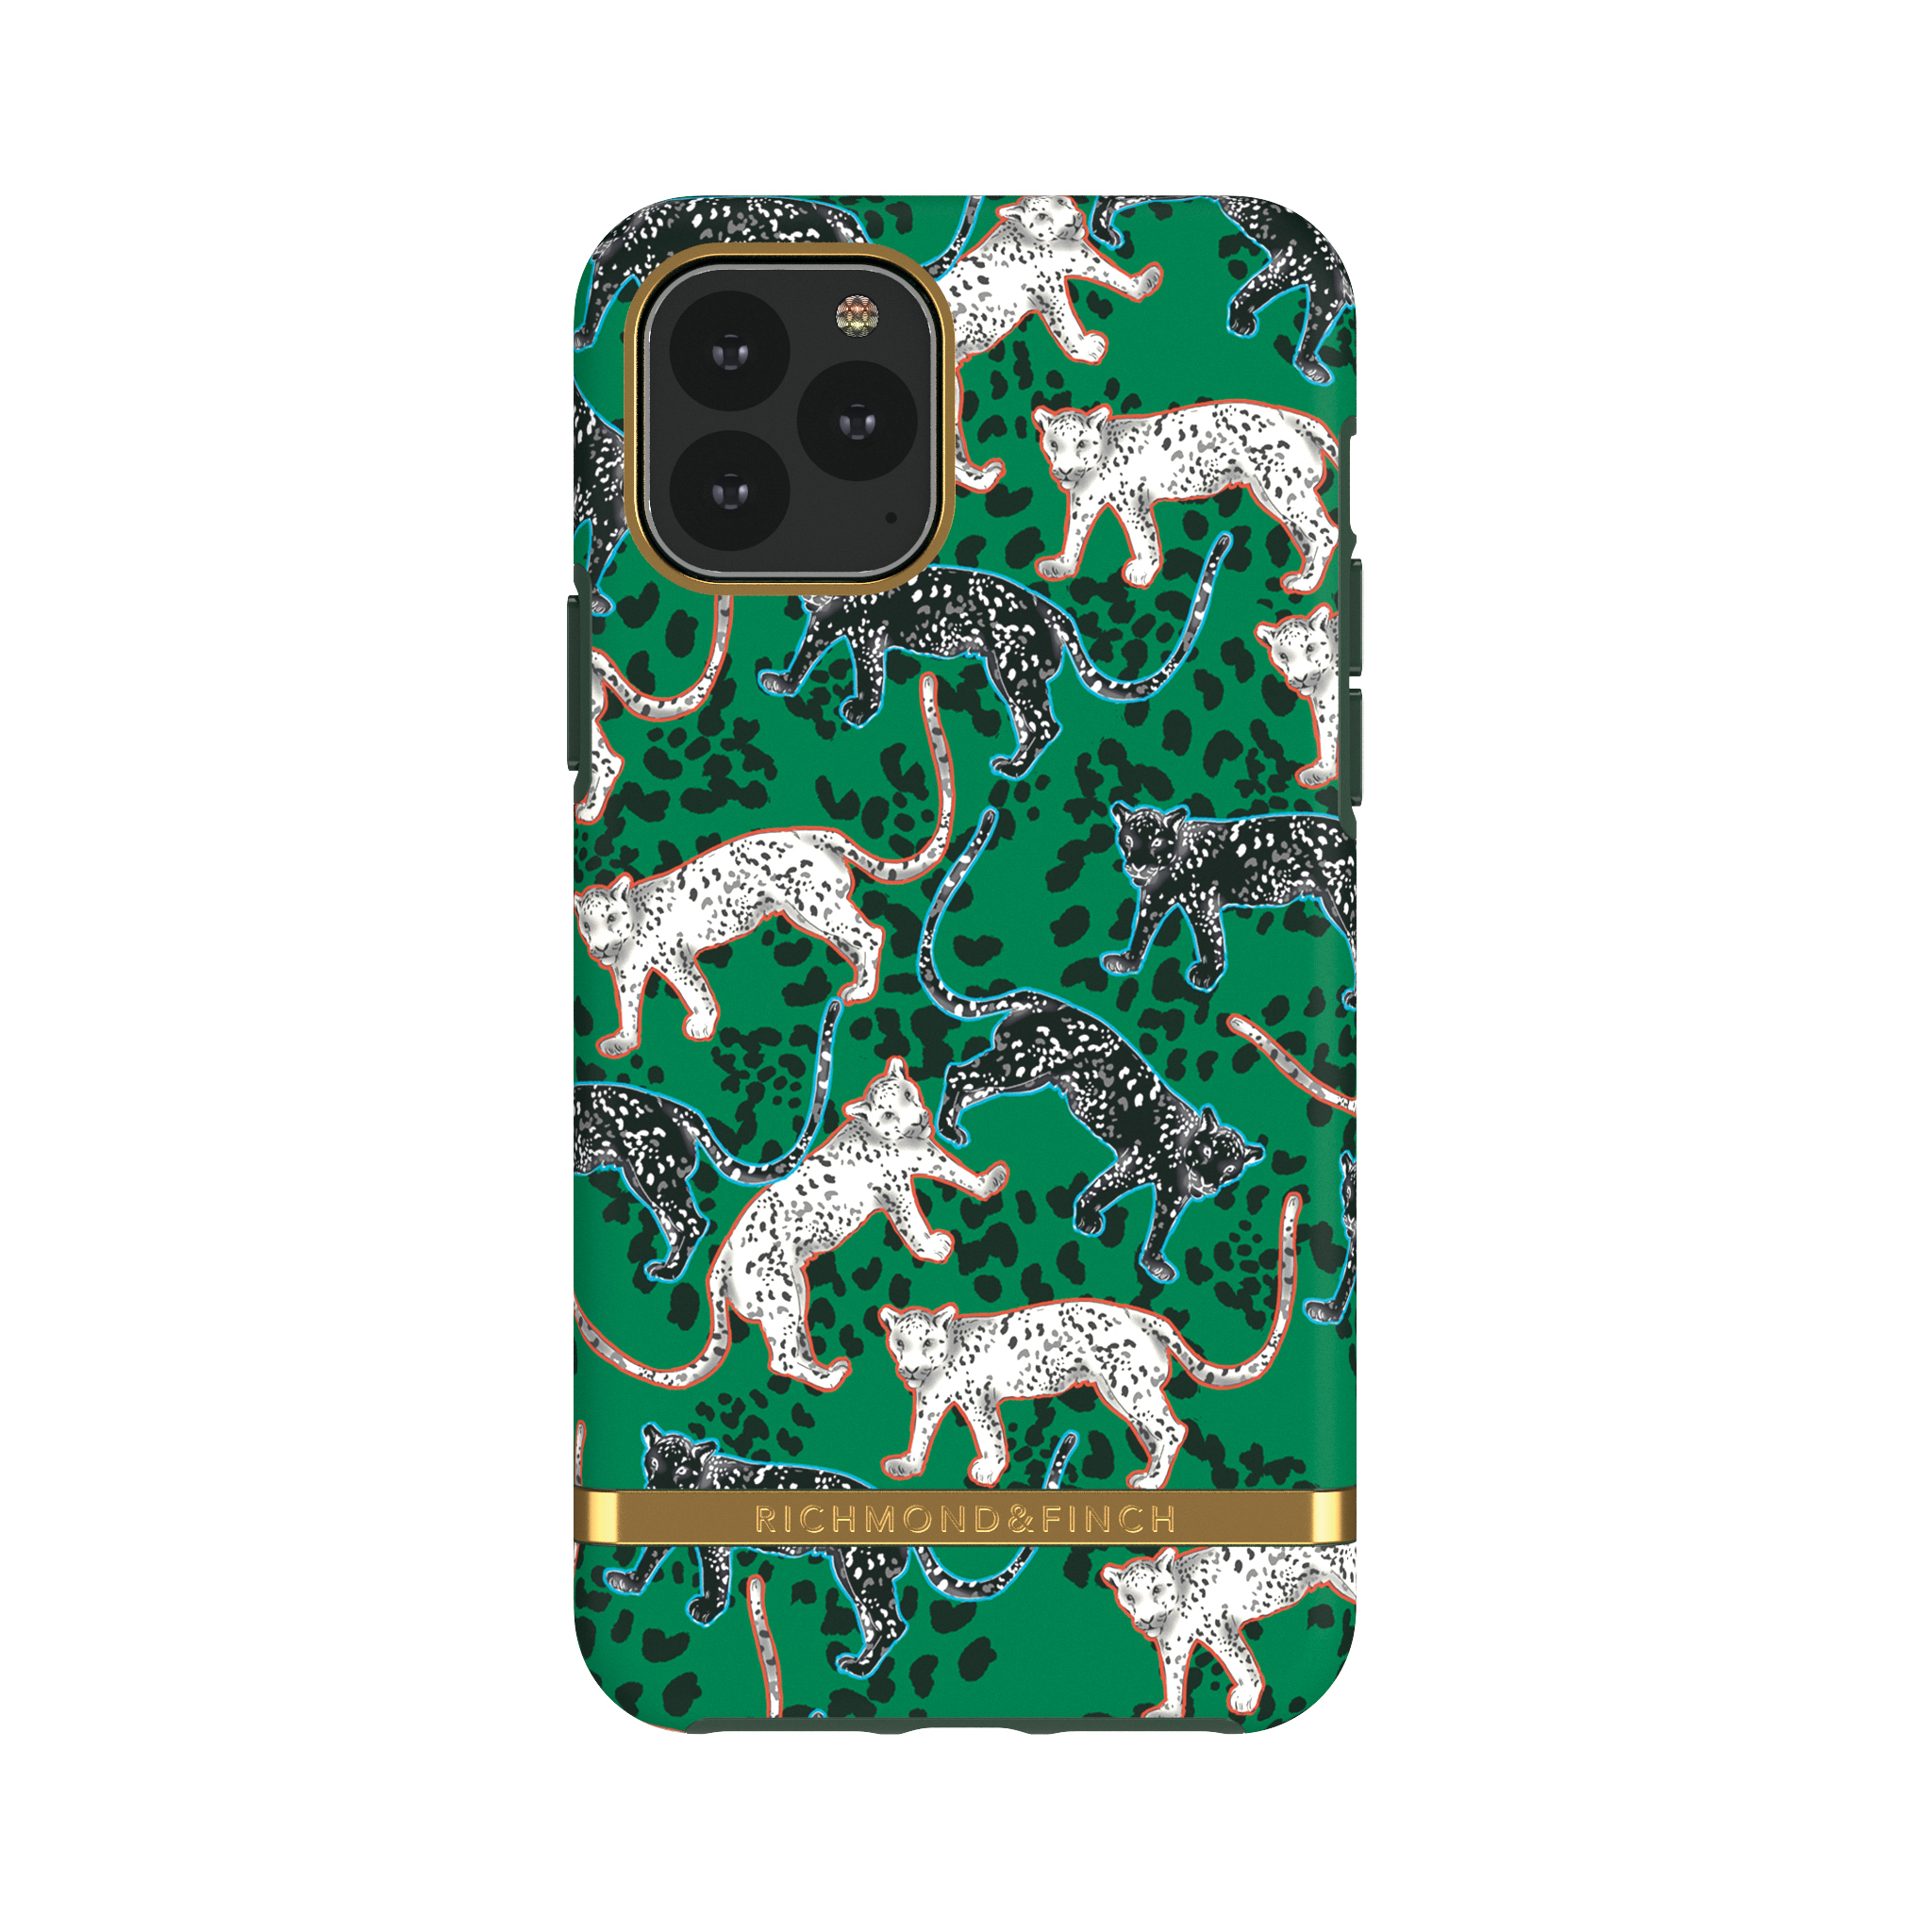 RICHMOND & 11 MAX, Green PRO APPLE, Pro iPhone 11 Max, IPHONE Backcover, GREEN Leopard FINCH